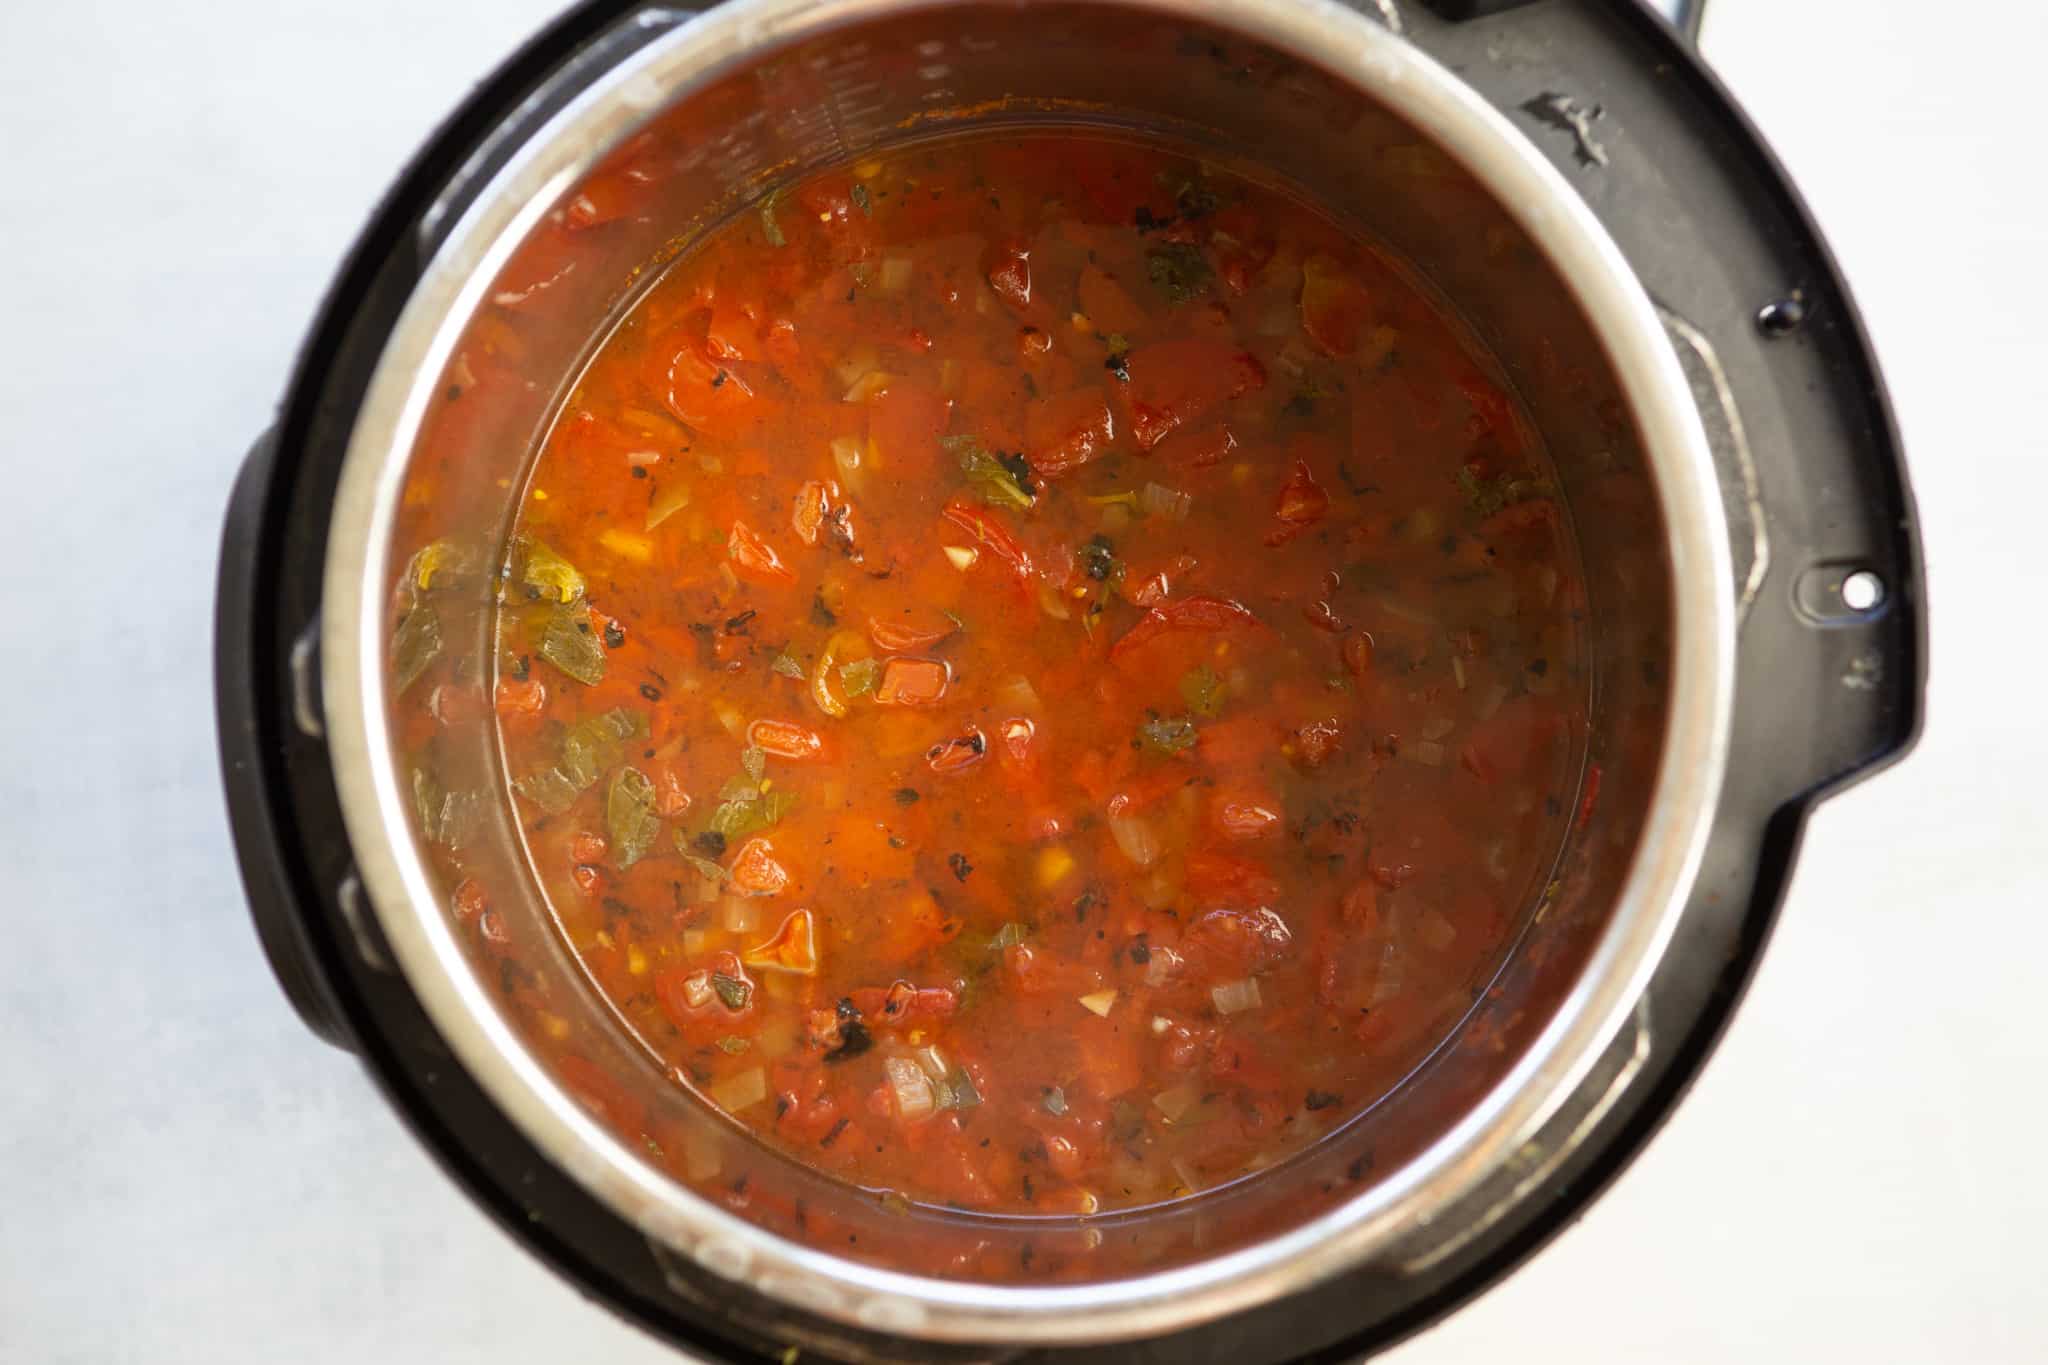 Tomato Soup after removing the instant pot lid after cooking